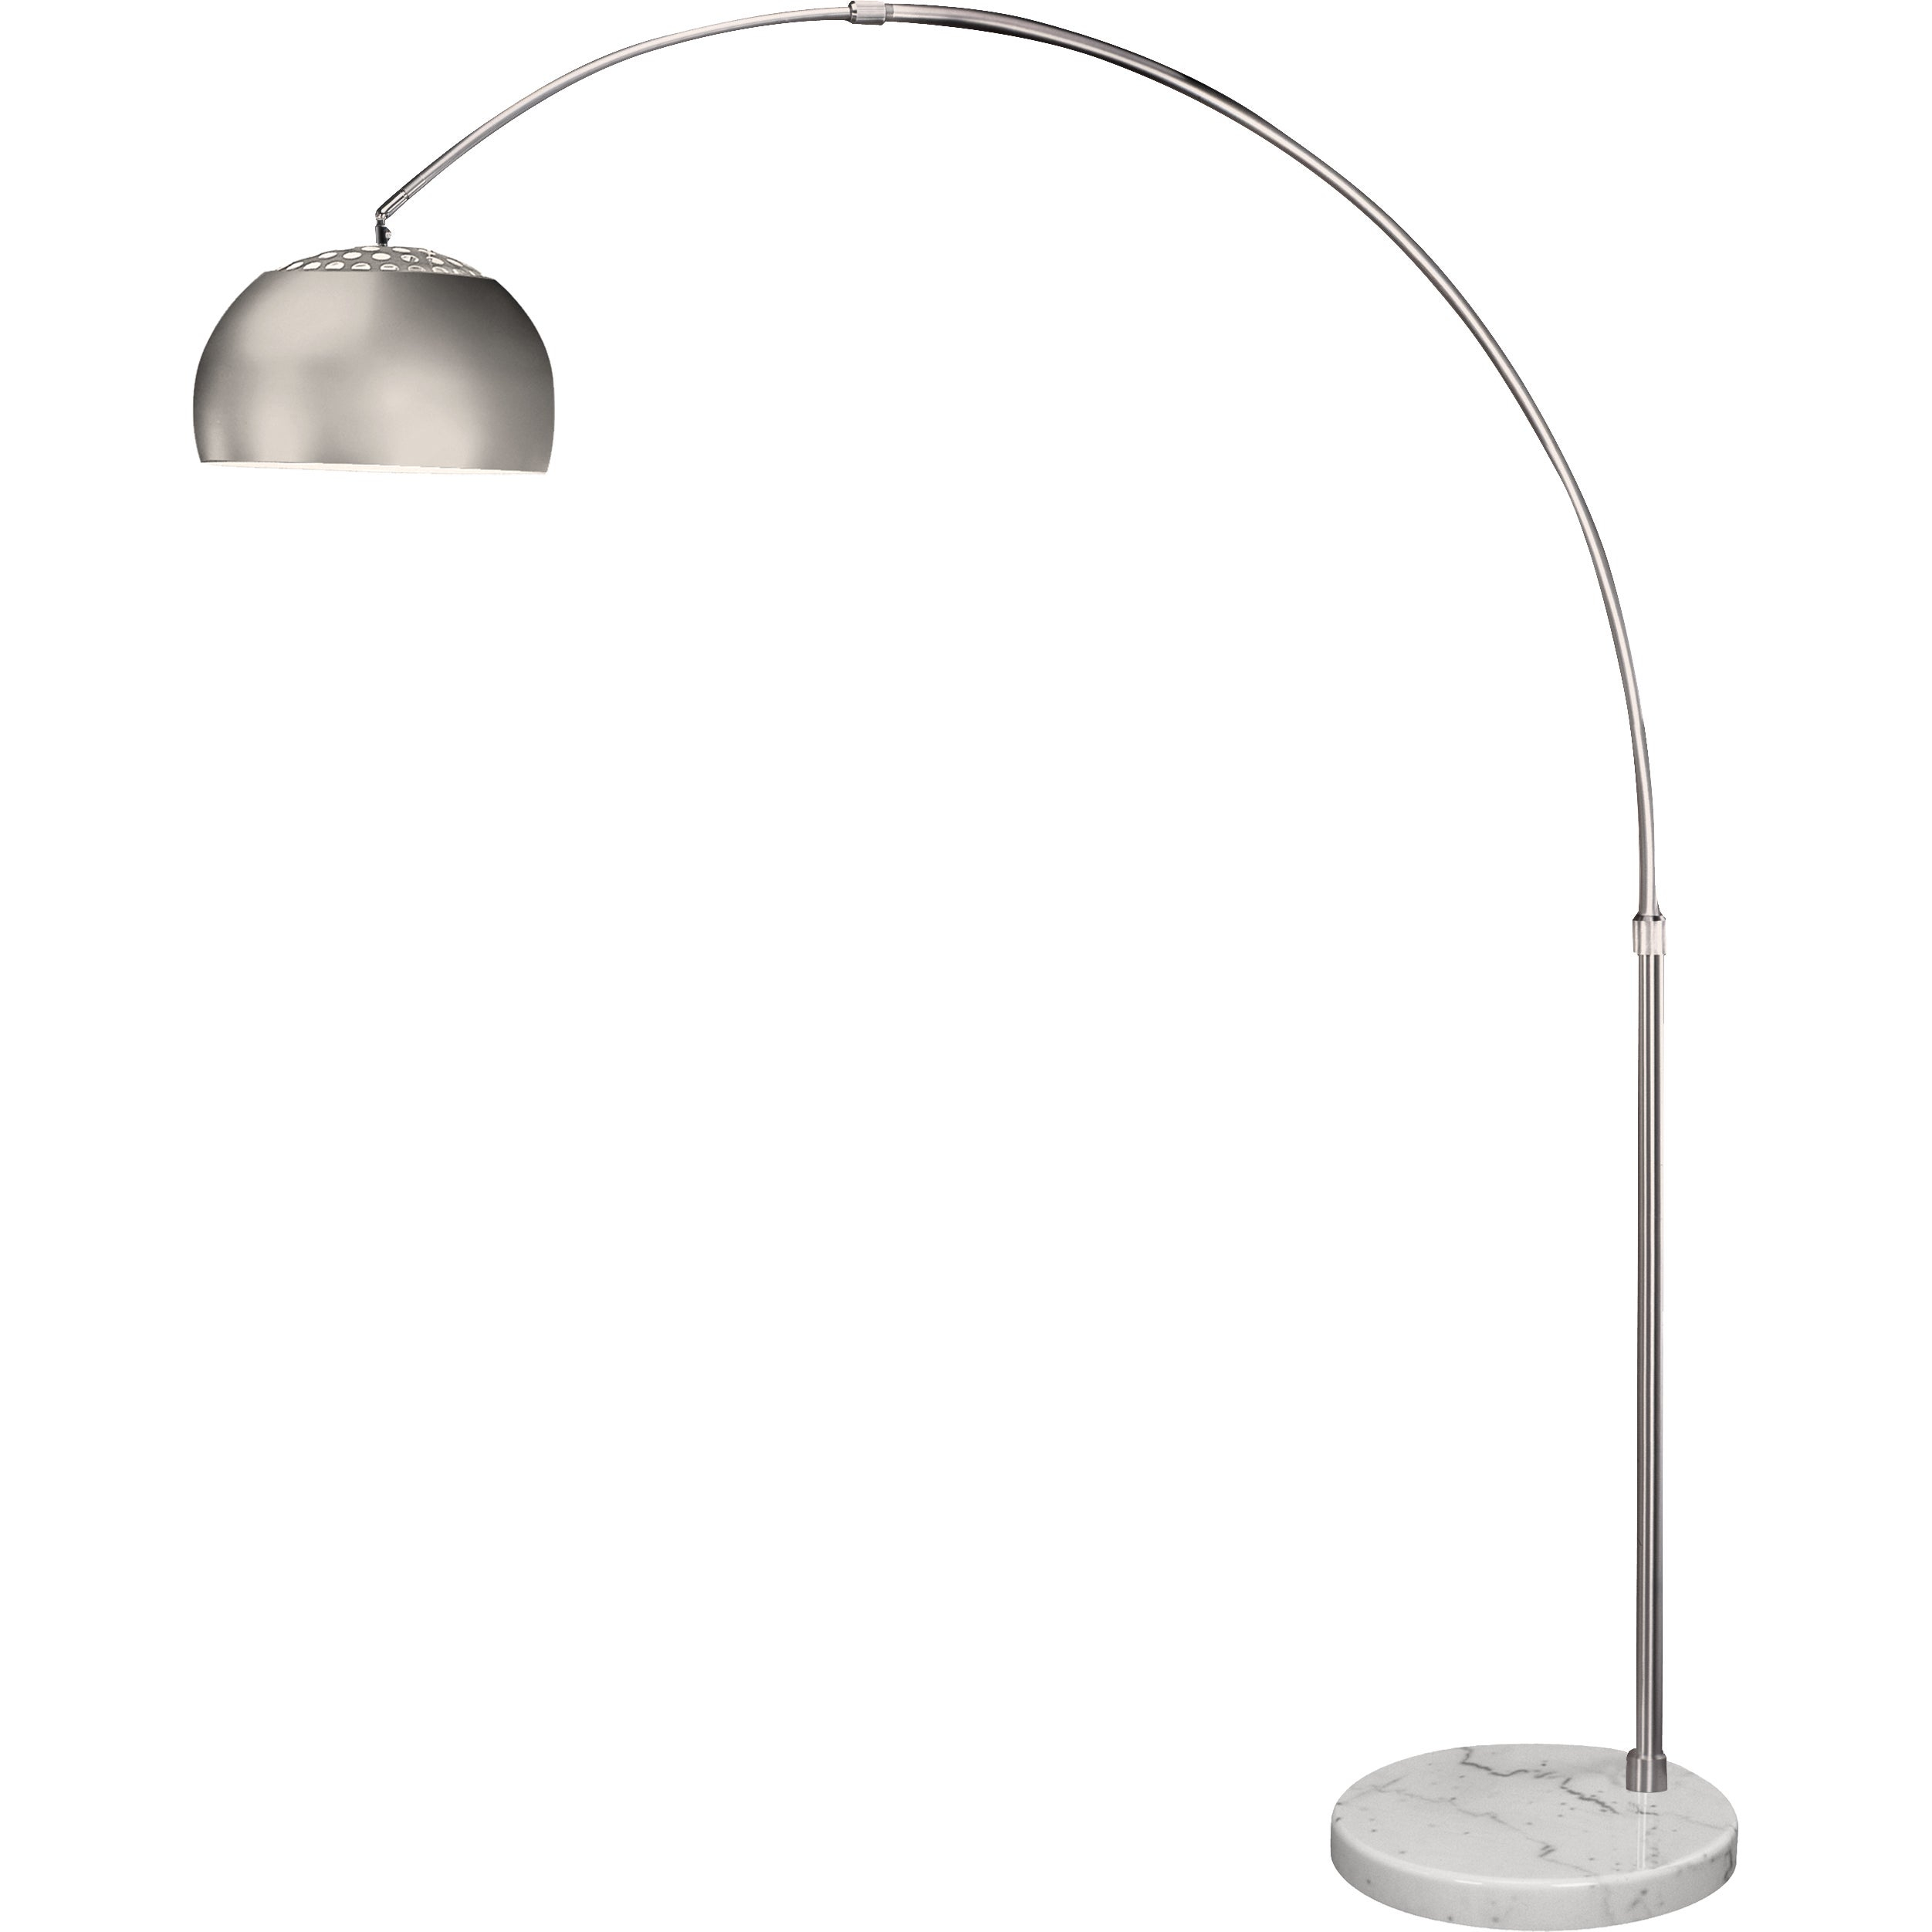 Mid 1 Light Brushed Nickel Arc Floor Lamp pertaining to proportions 2503 X 2503